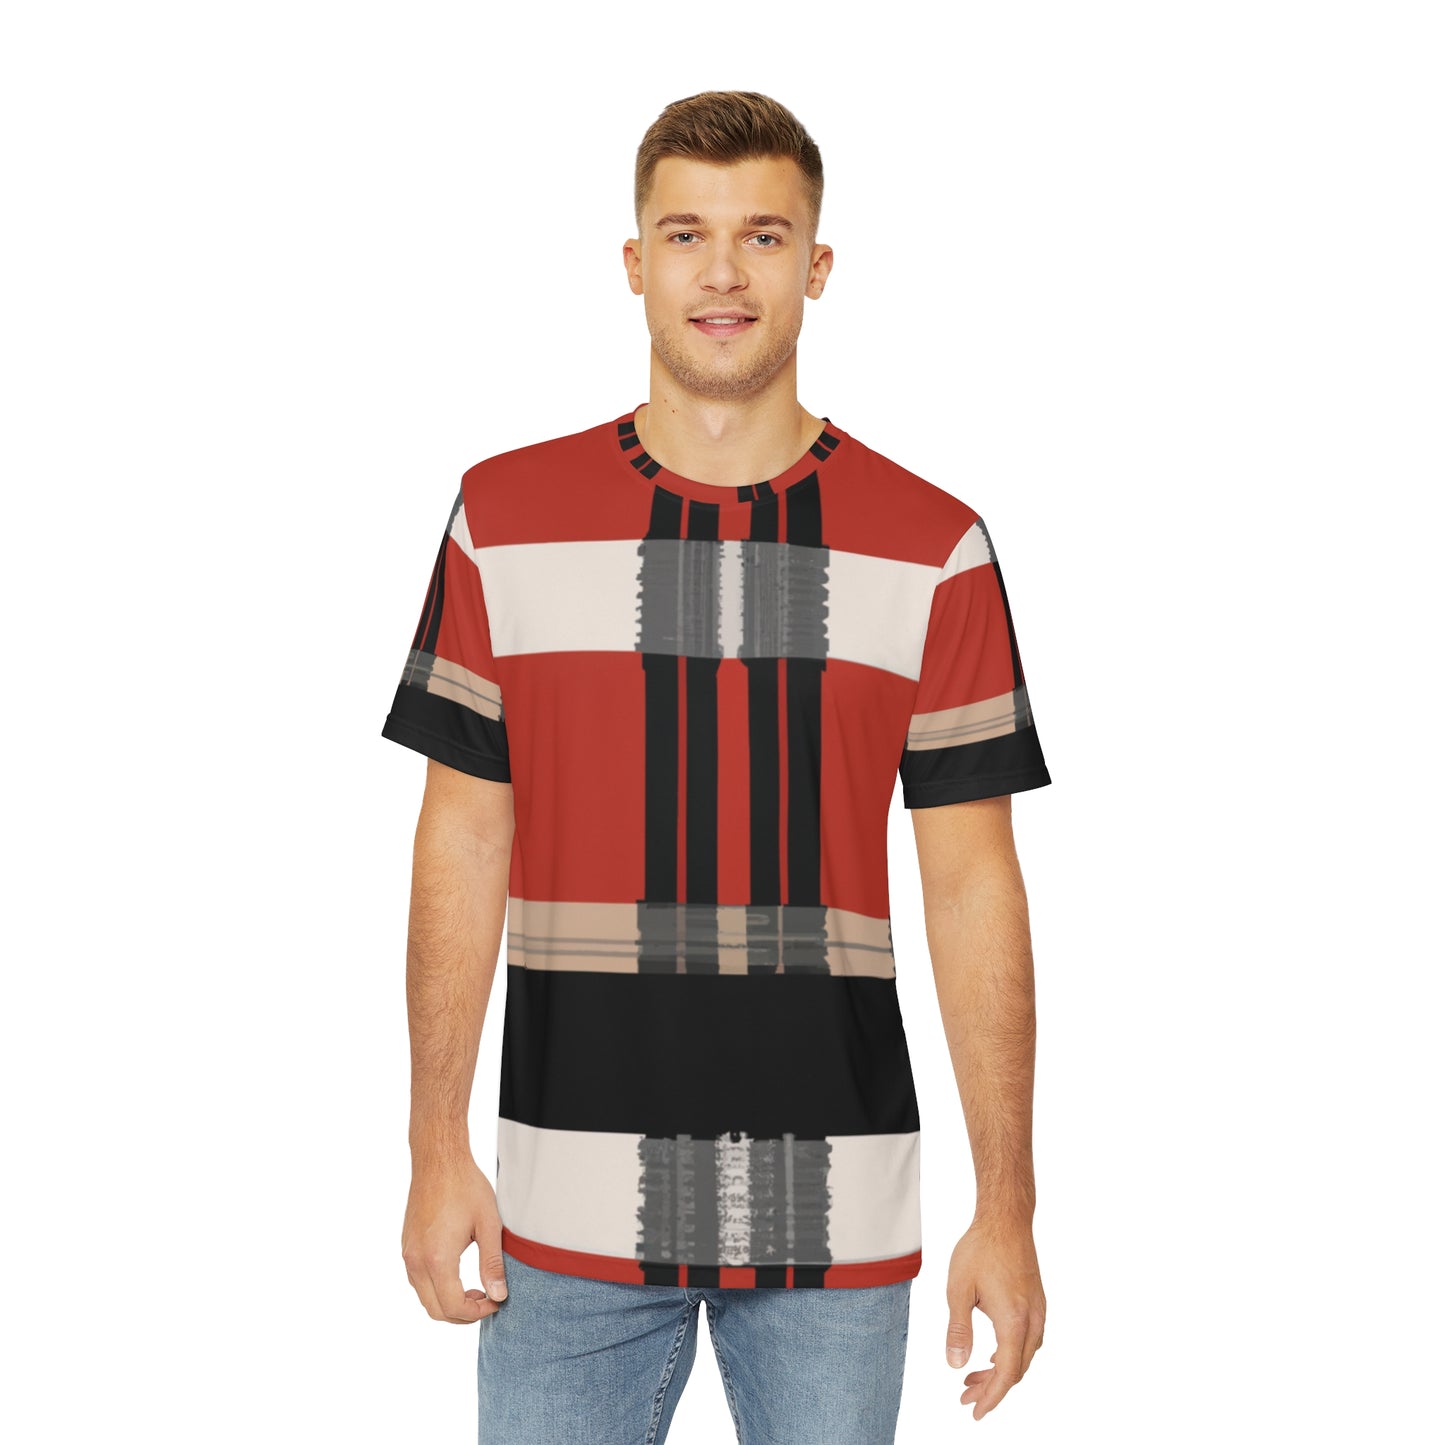 Front view of the Highland Cardinal Alba Tartan Crewneck Pullover All-Over Print Short-Sleeved Shirt red black beige plaid pattern paired with casual denim pants worn by a white man